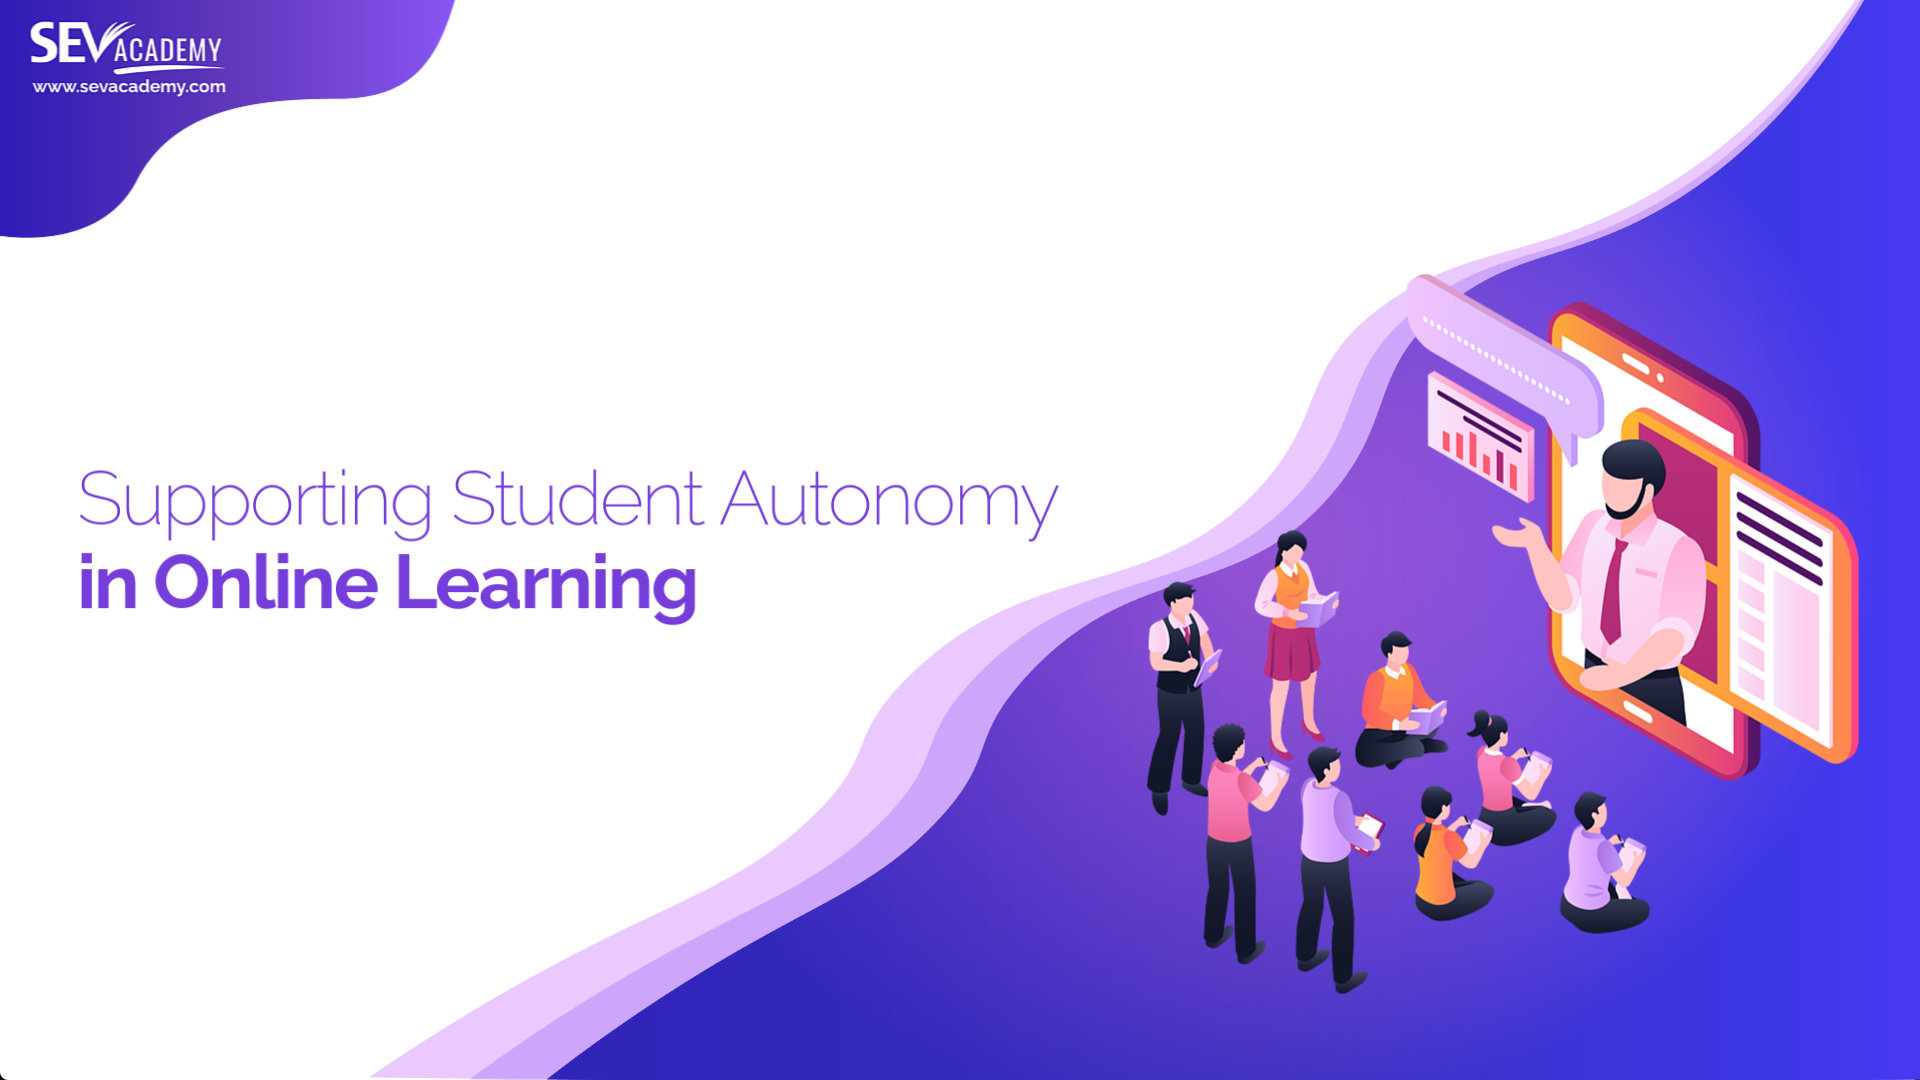 Supporting Student Autonomy in Online Learning